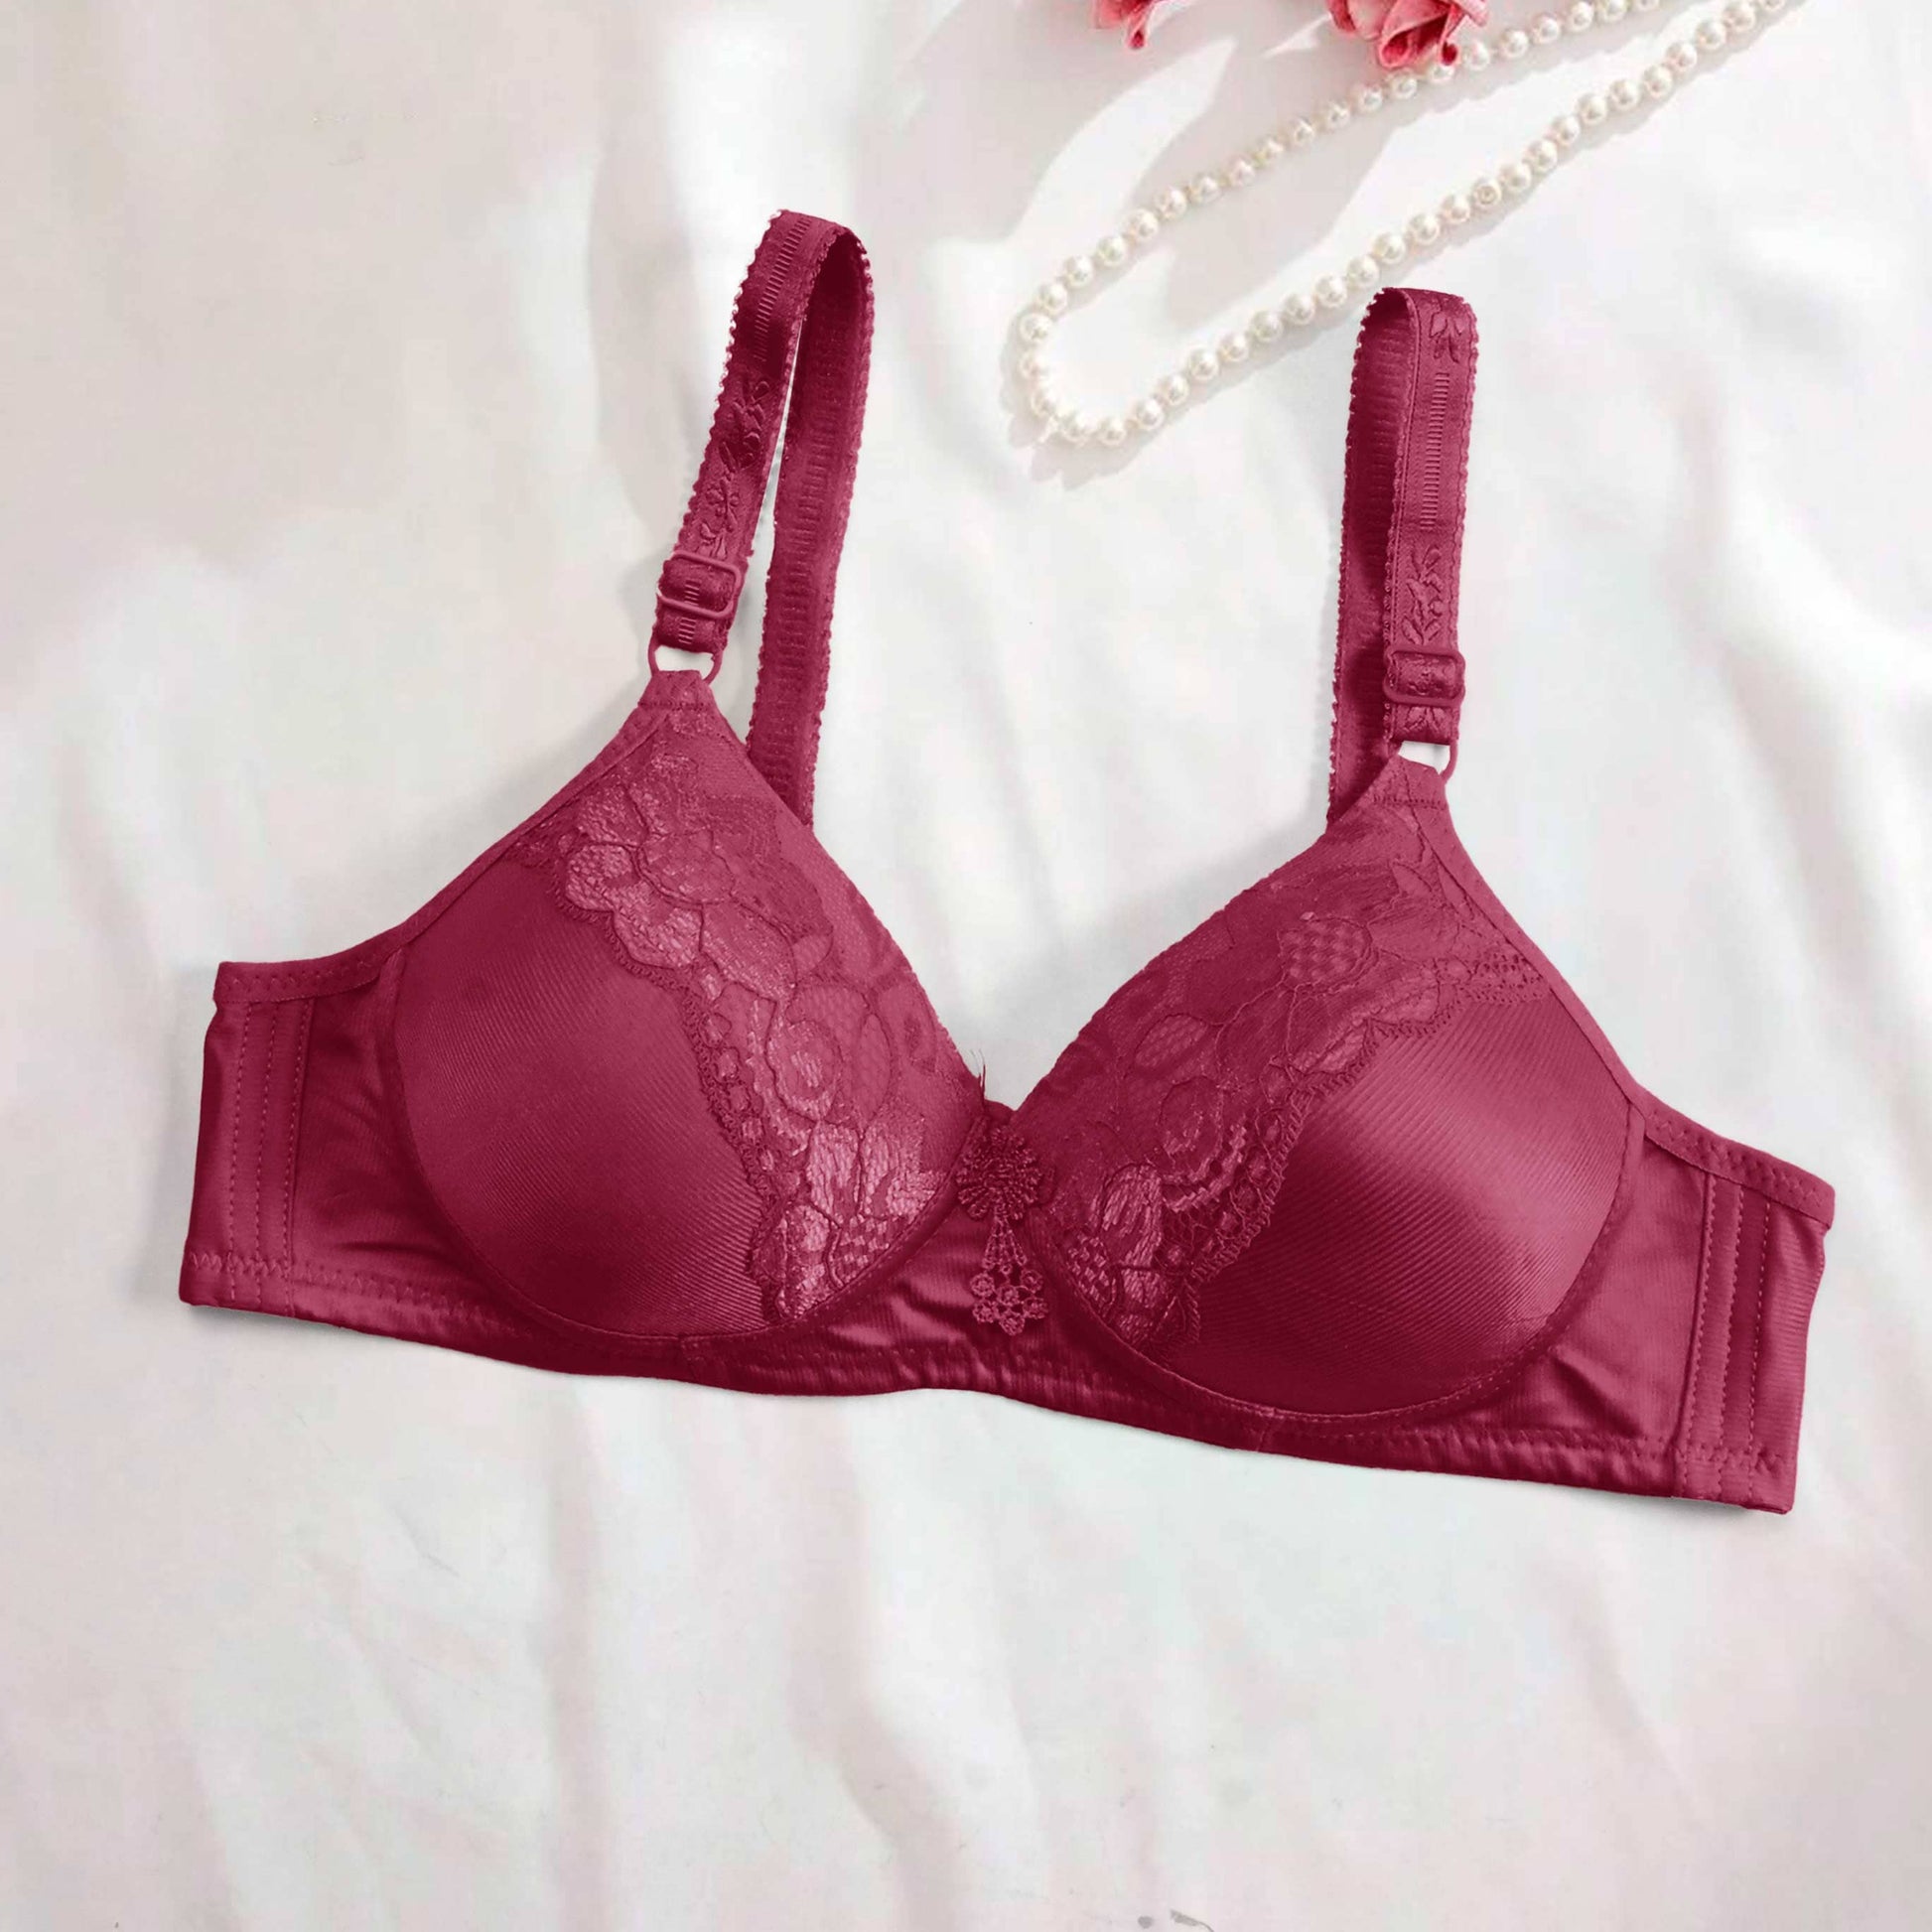 Yidieman Women's Floral Lace Design Stretched Push Up Padded Bra Women's Lingerie RAM Maroon 30 